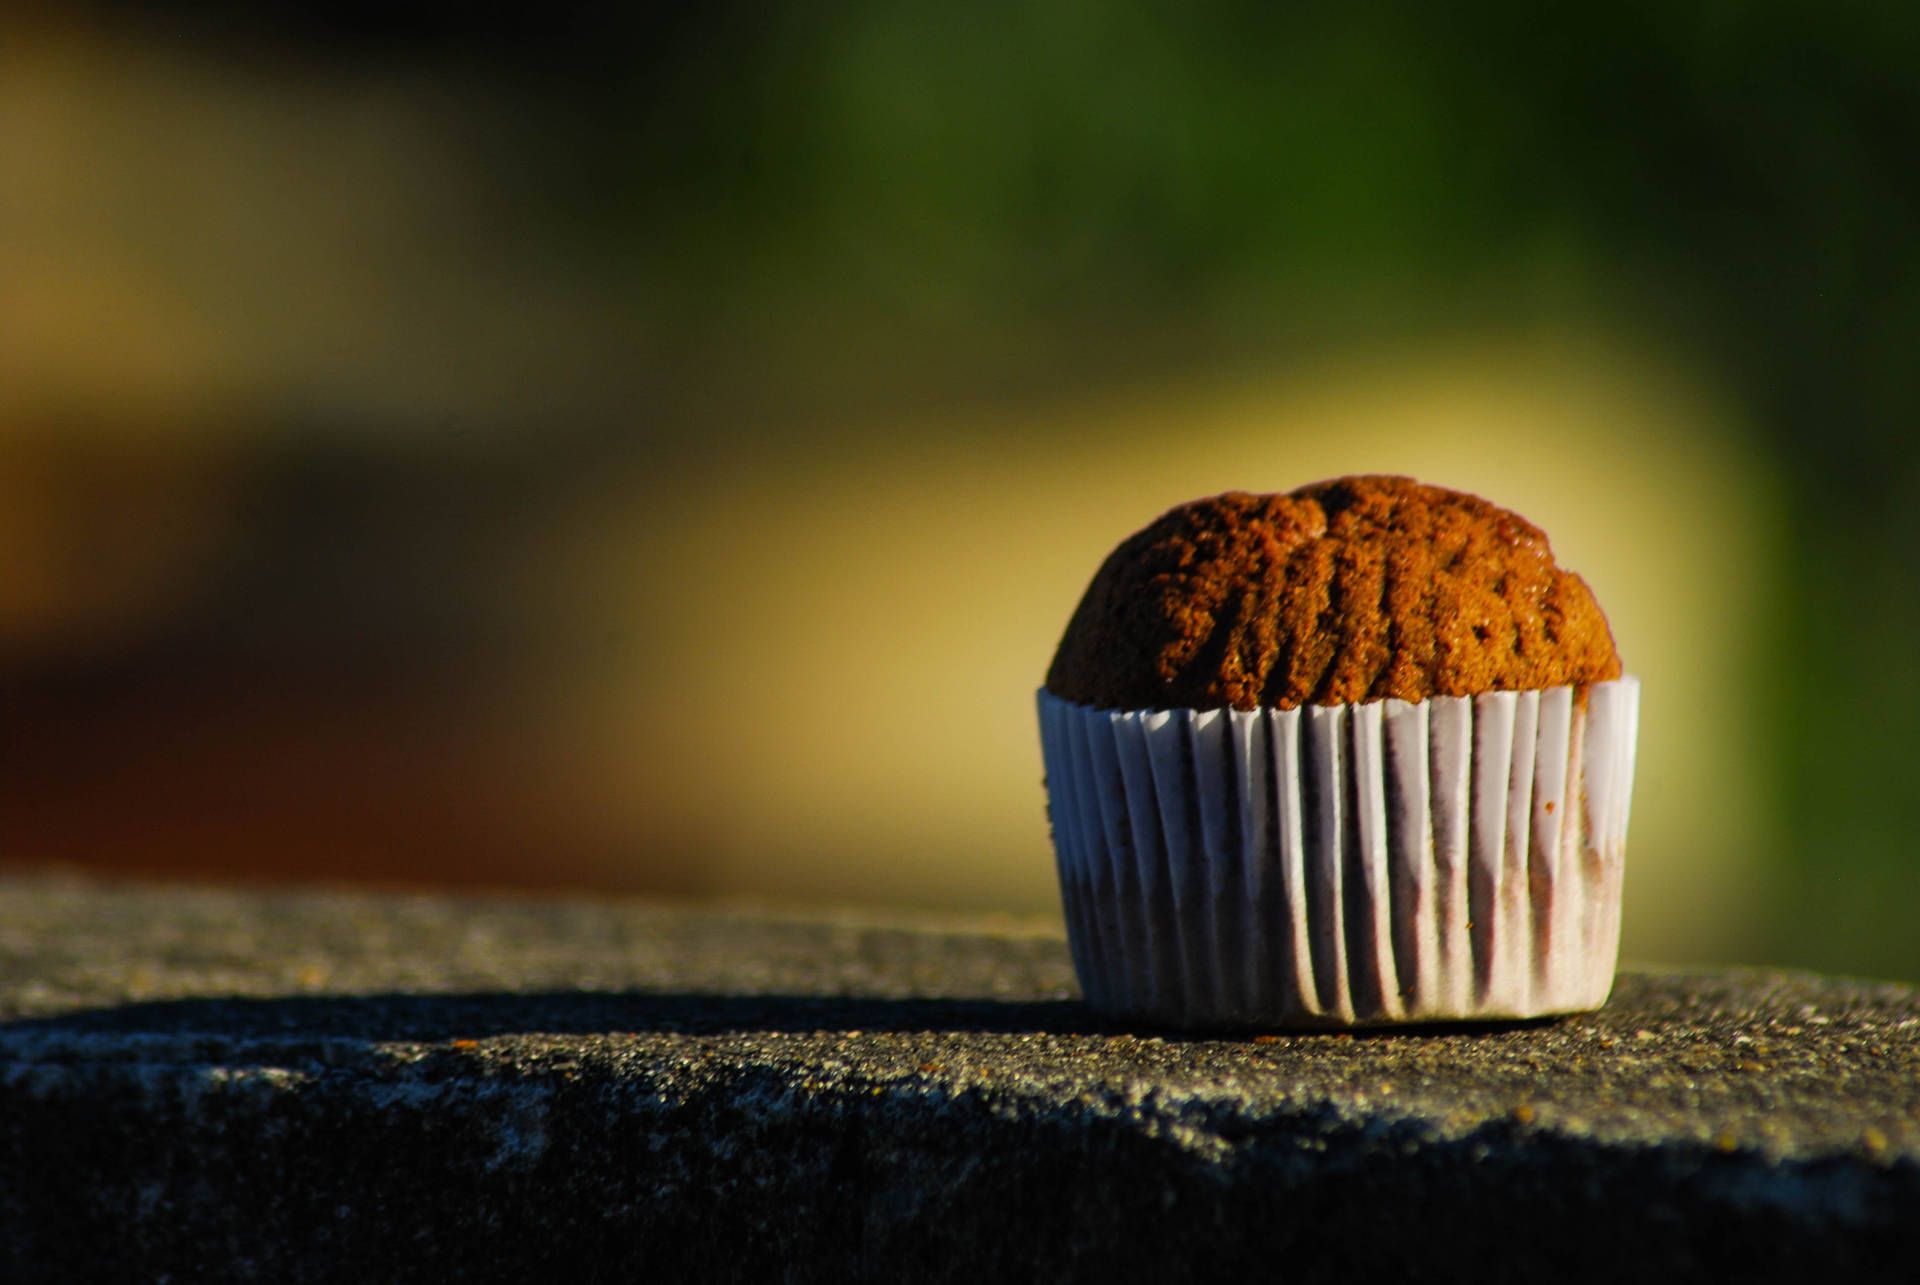 Muffin Wallpaper for FREE